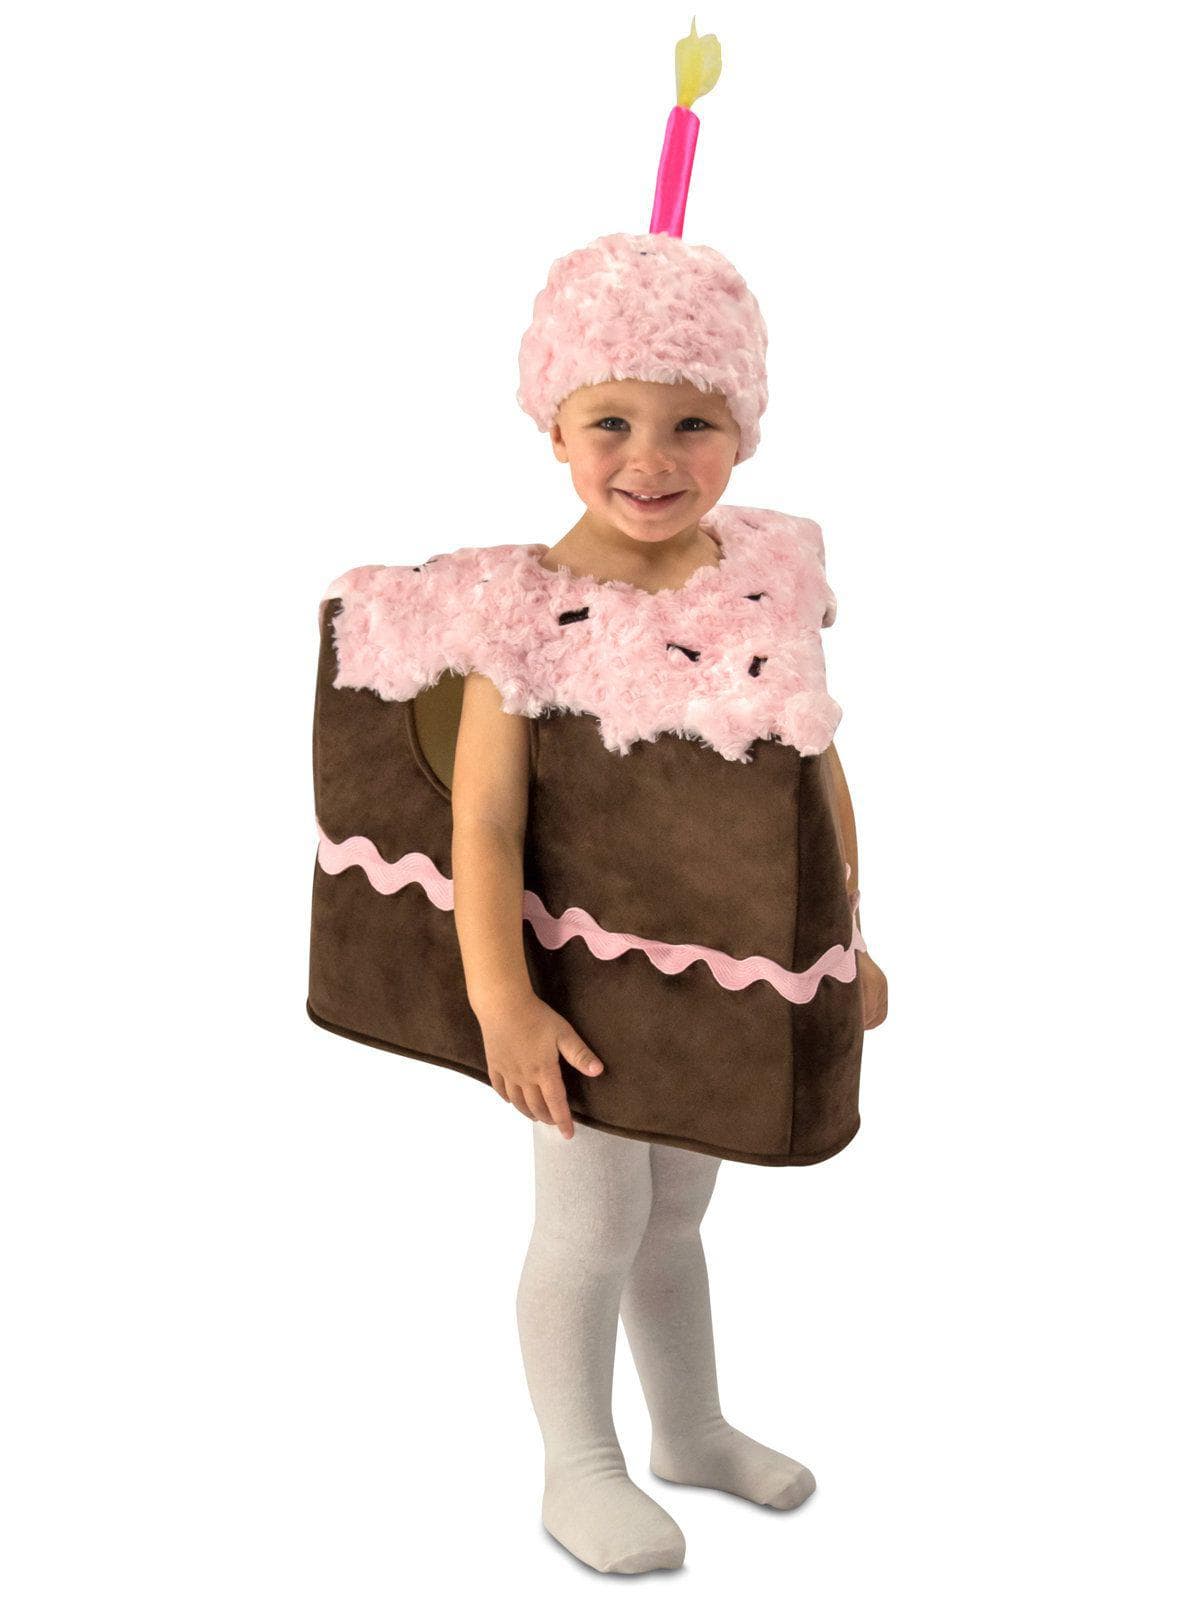 Baby/Toddler Piece of Cake Costume - costumes.com